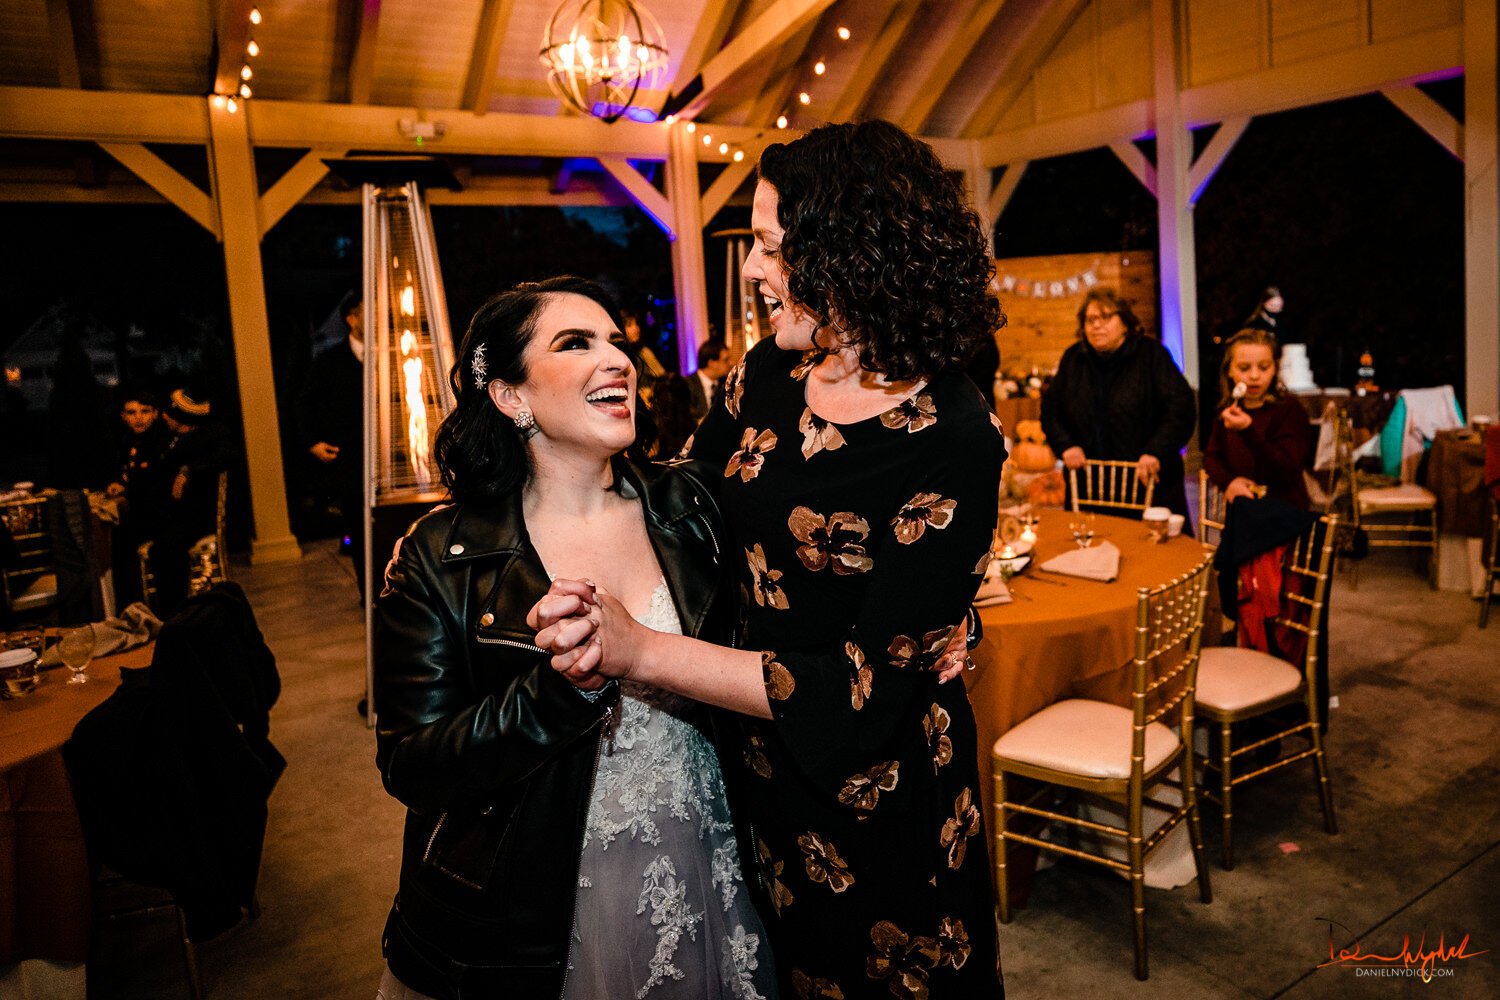 nj pinup goth bride dancing and laughing at halloween wedding